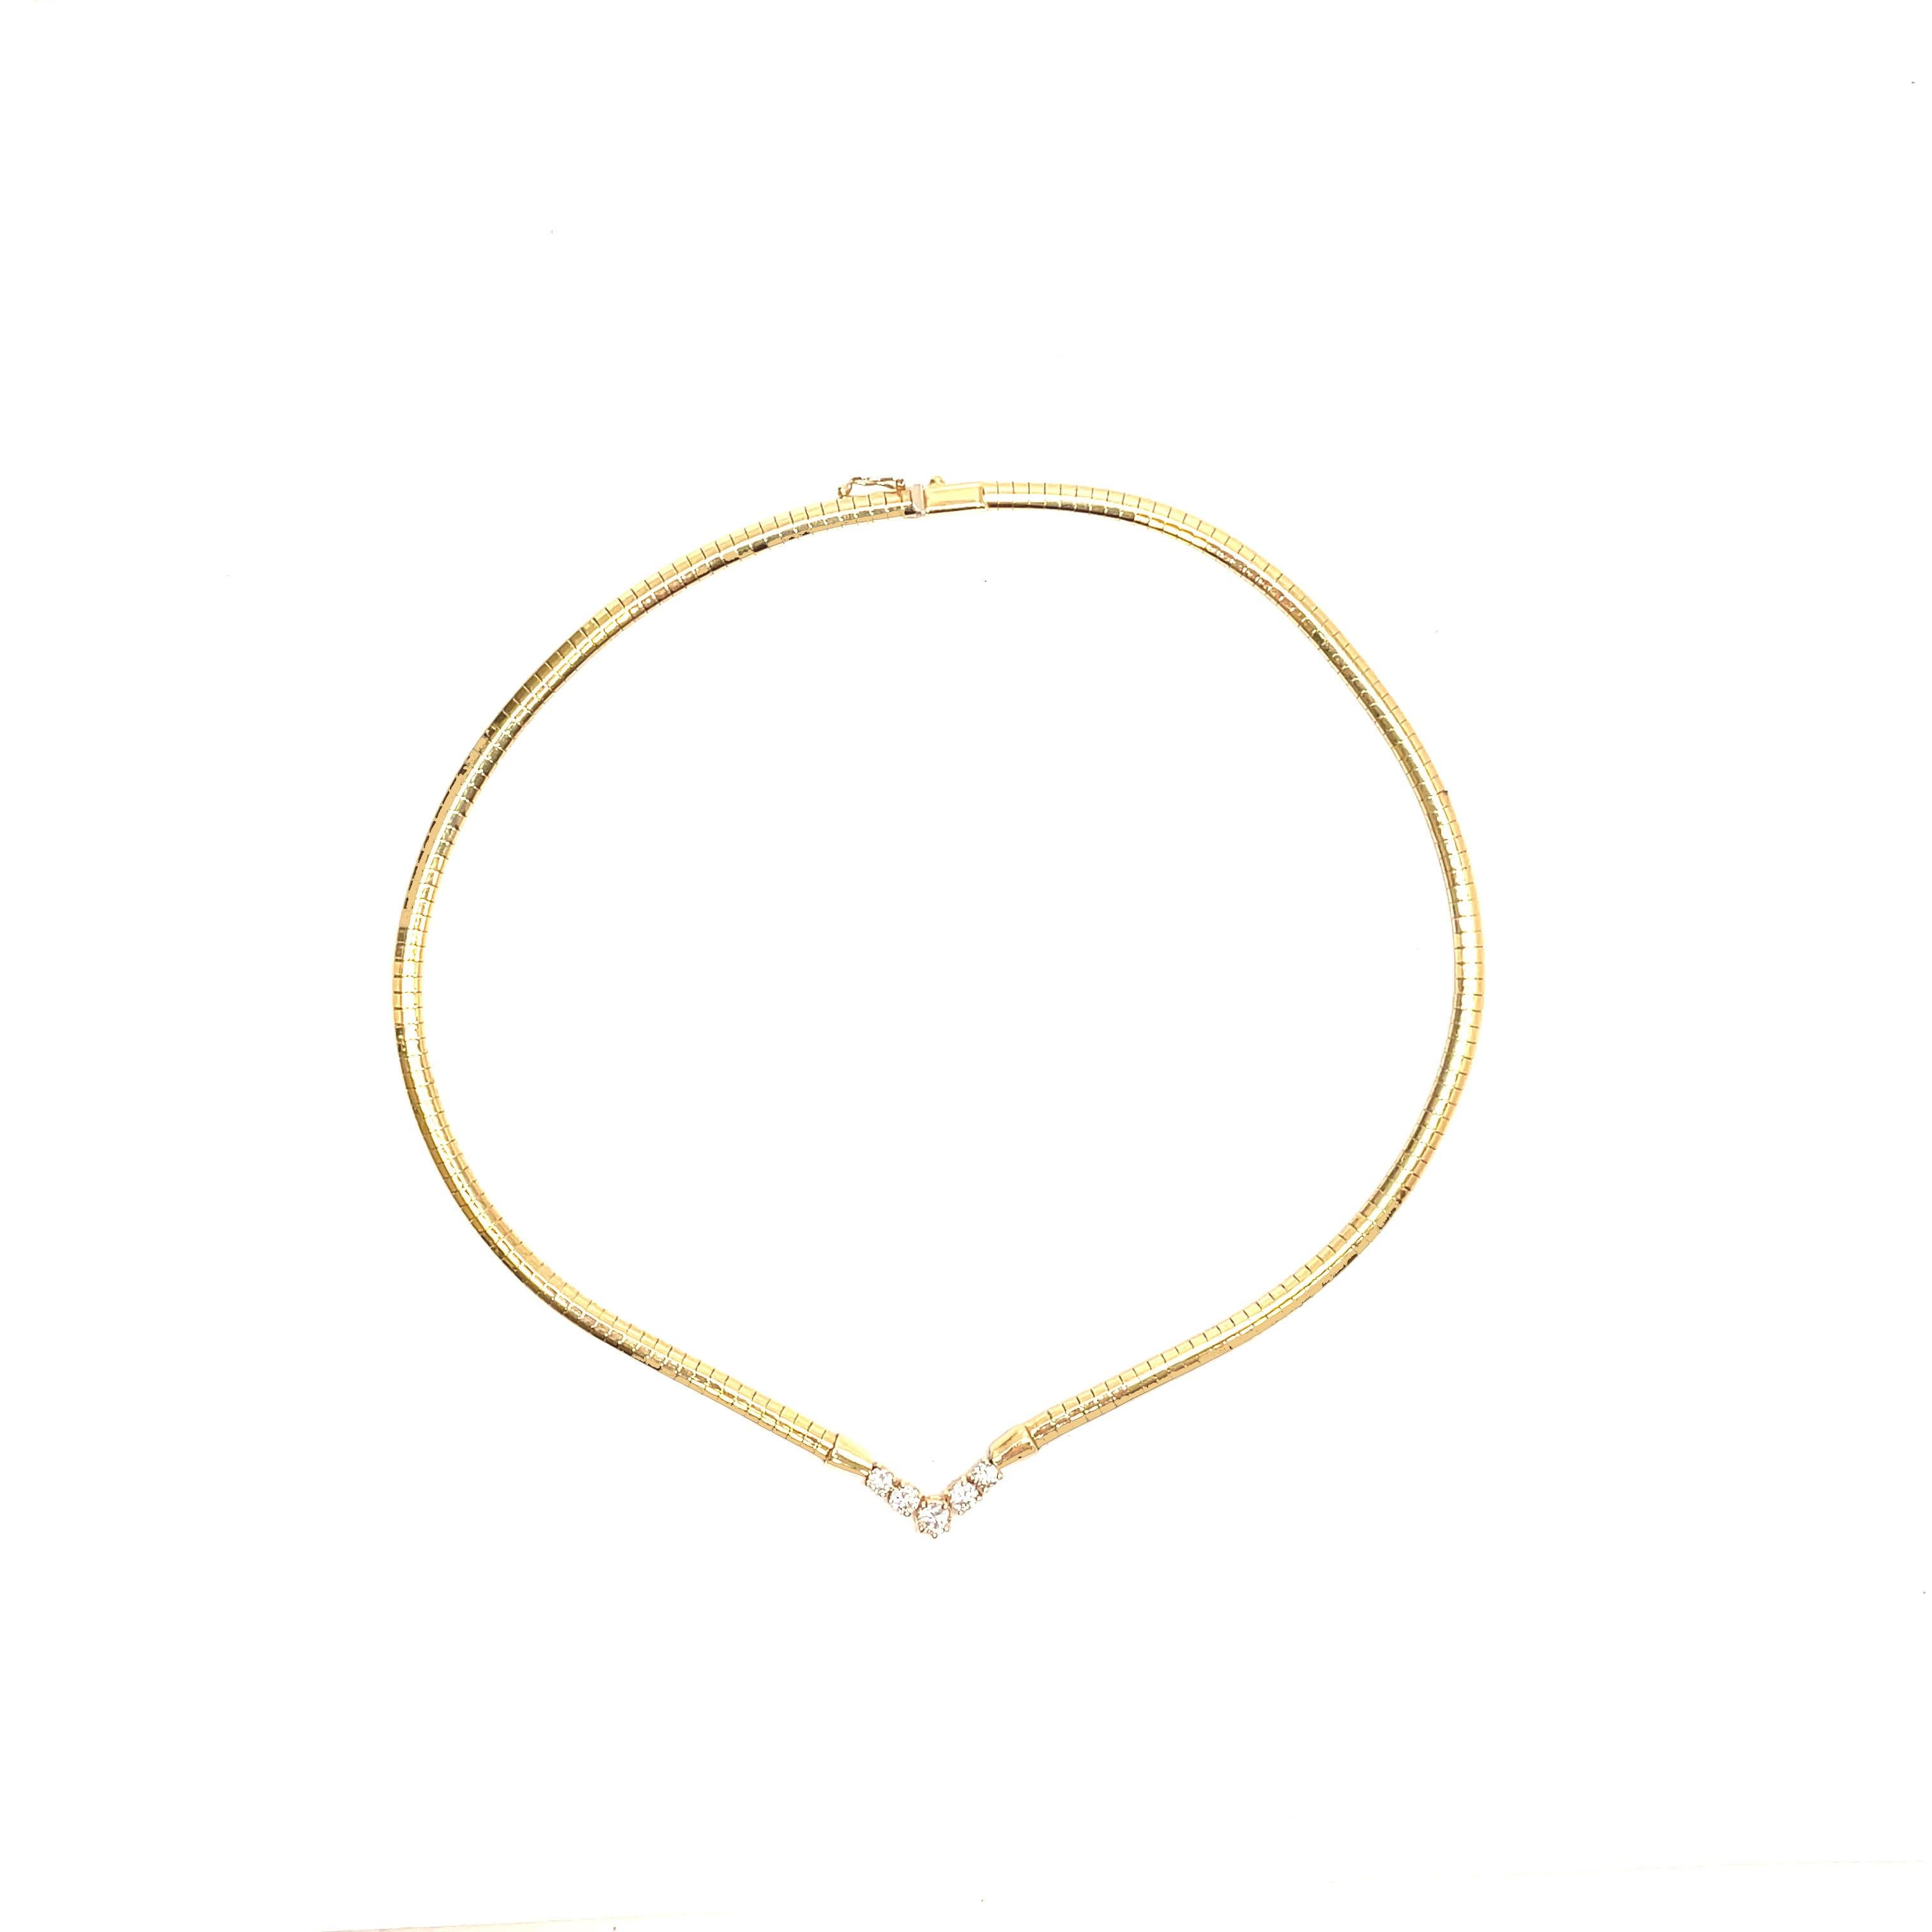 This classic diamond necklace in a 'V-shaped' design is set in 14K yellow gold. What is not to love about this stunning necklace? The warm golden yellow omega chain rests beautifully along the collar bone and is united by five bright dazzling white